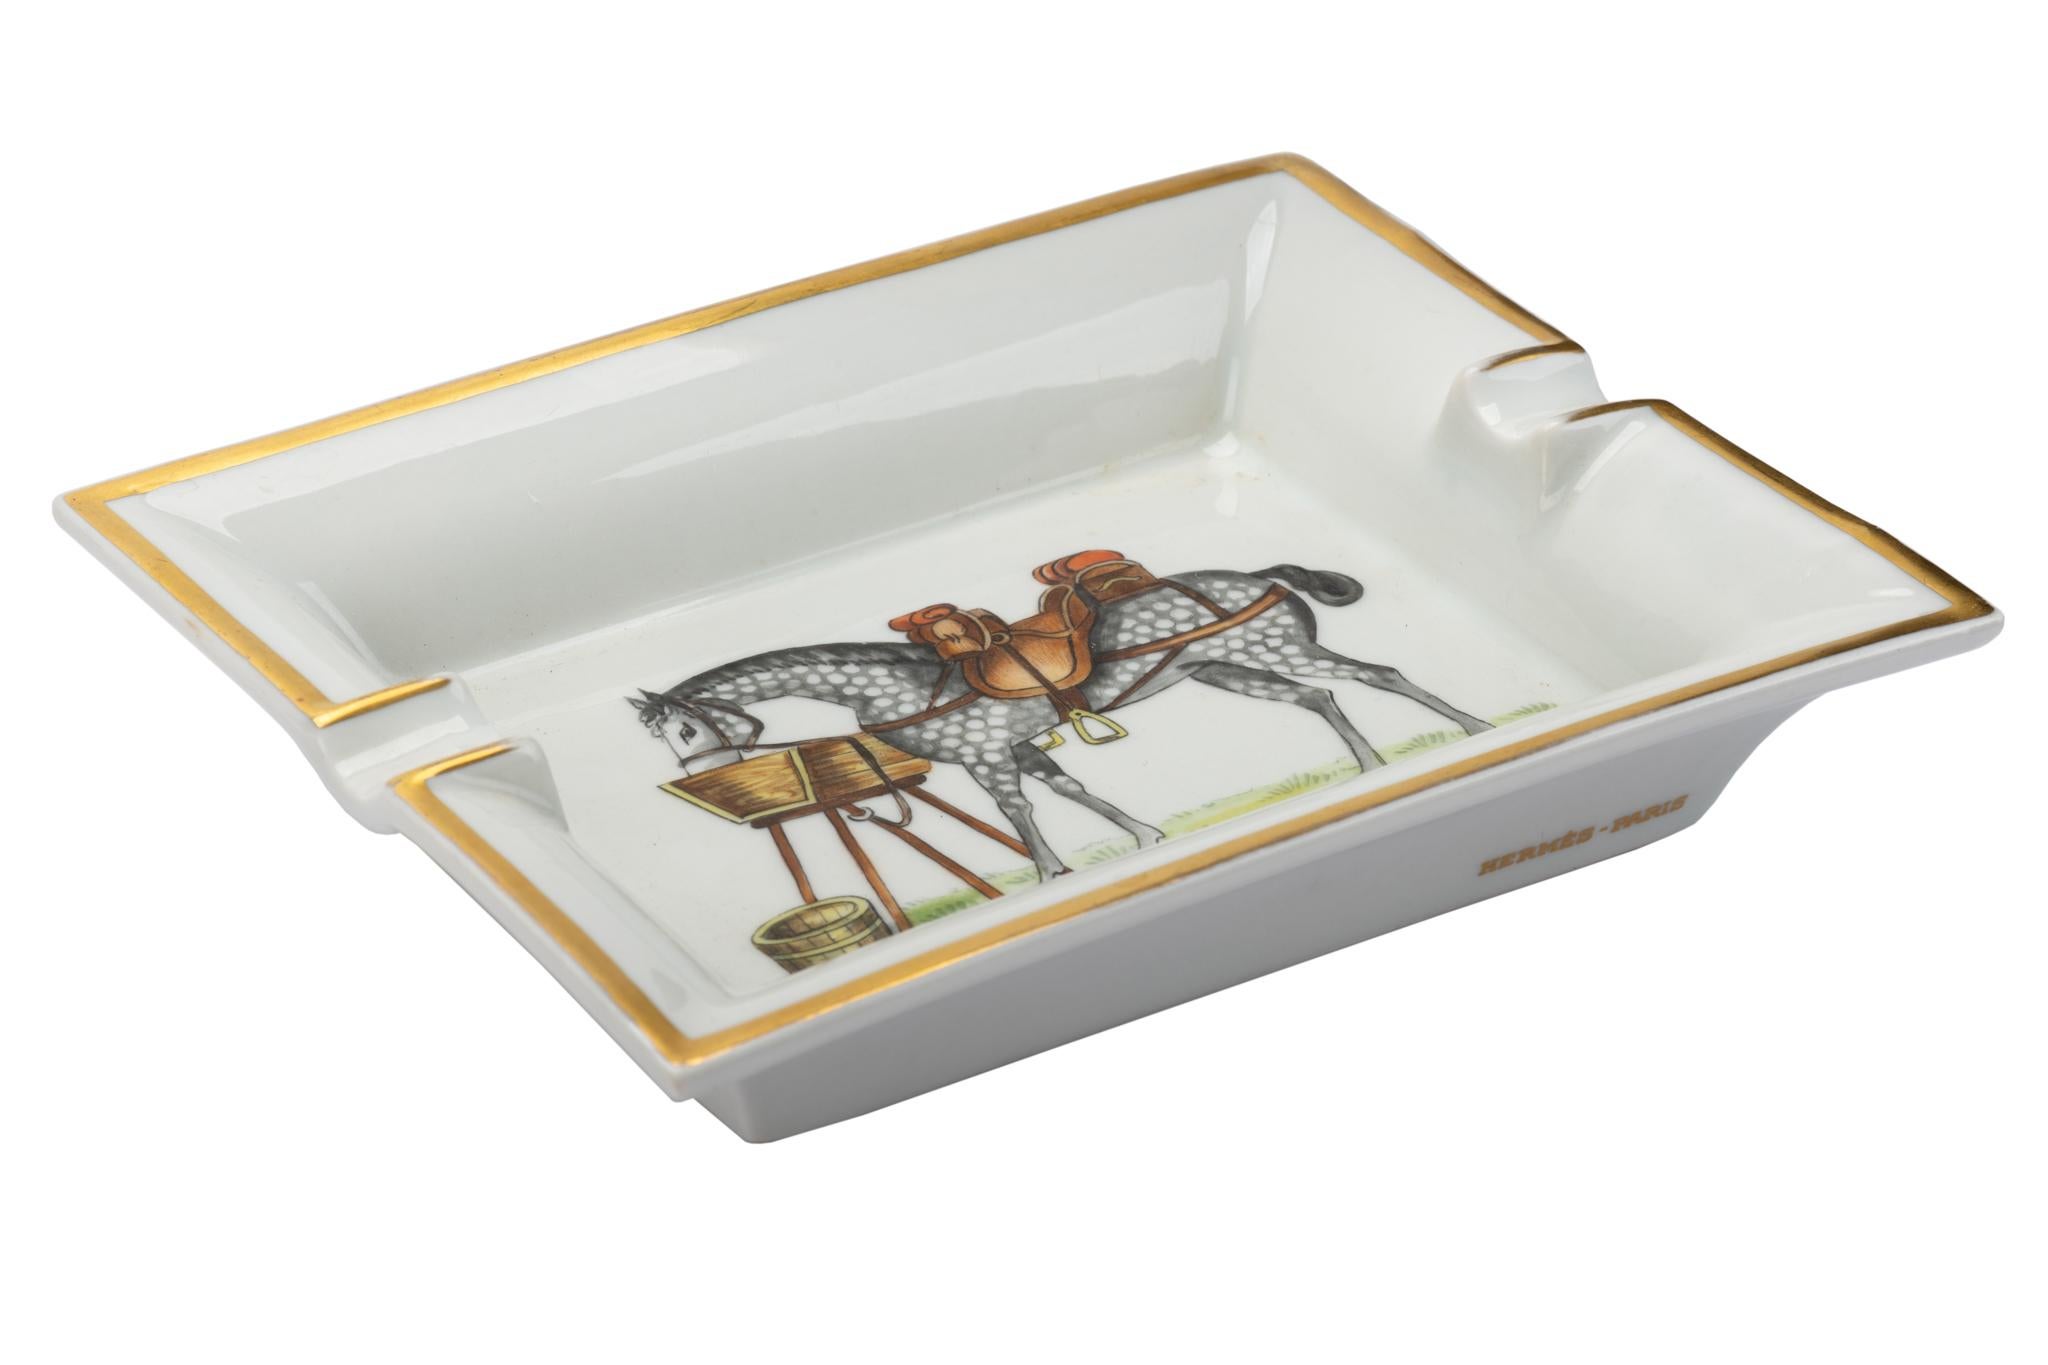 Hermes signature ashtray with horse design in white and gold. Suede stamped bottom. Minor wear on it. Made in France.